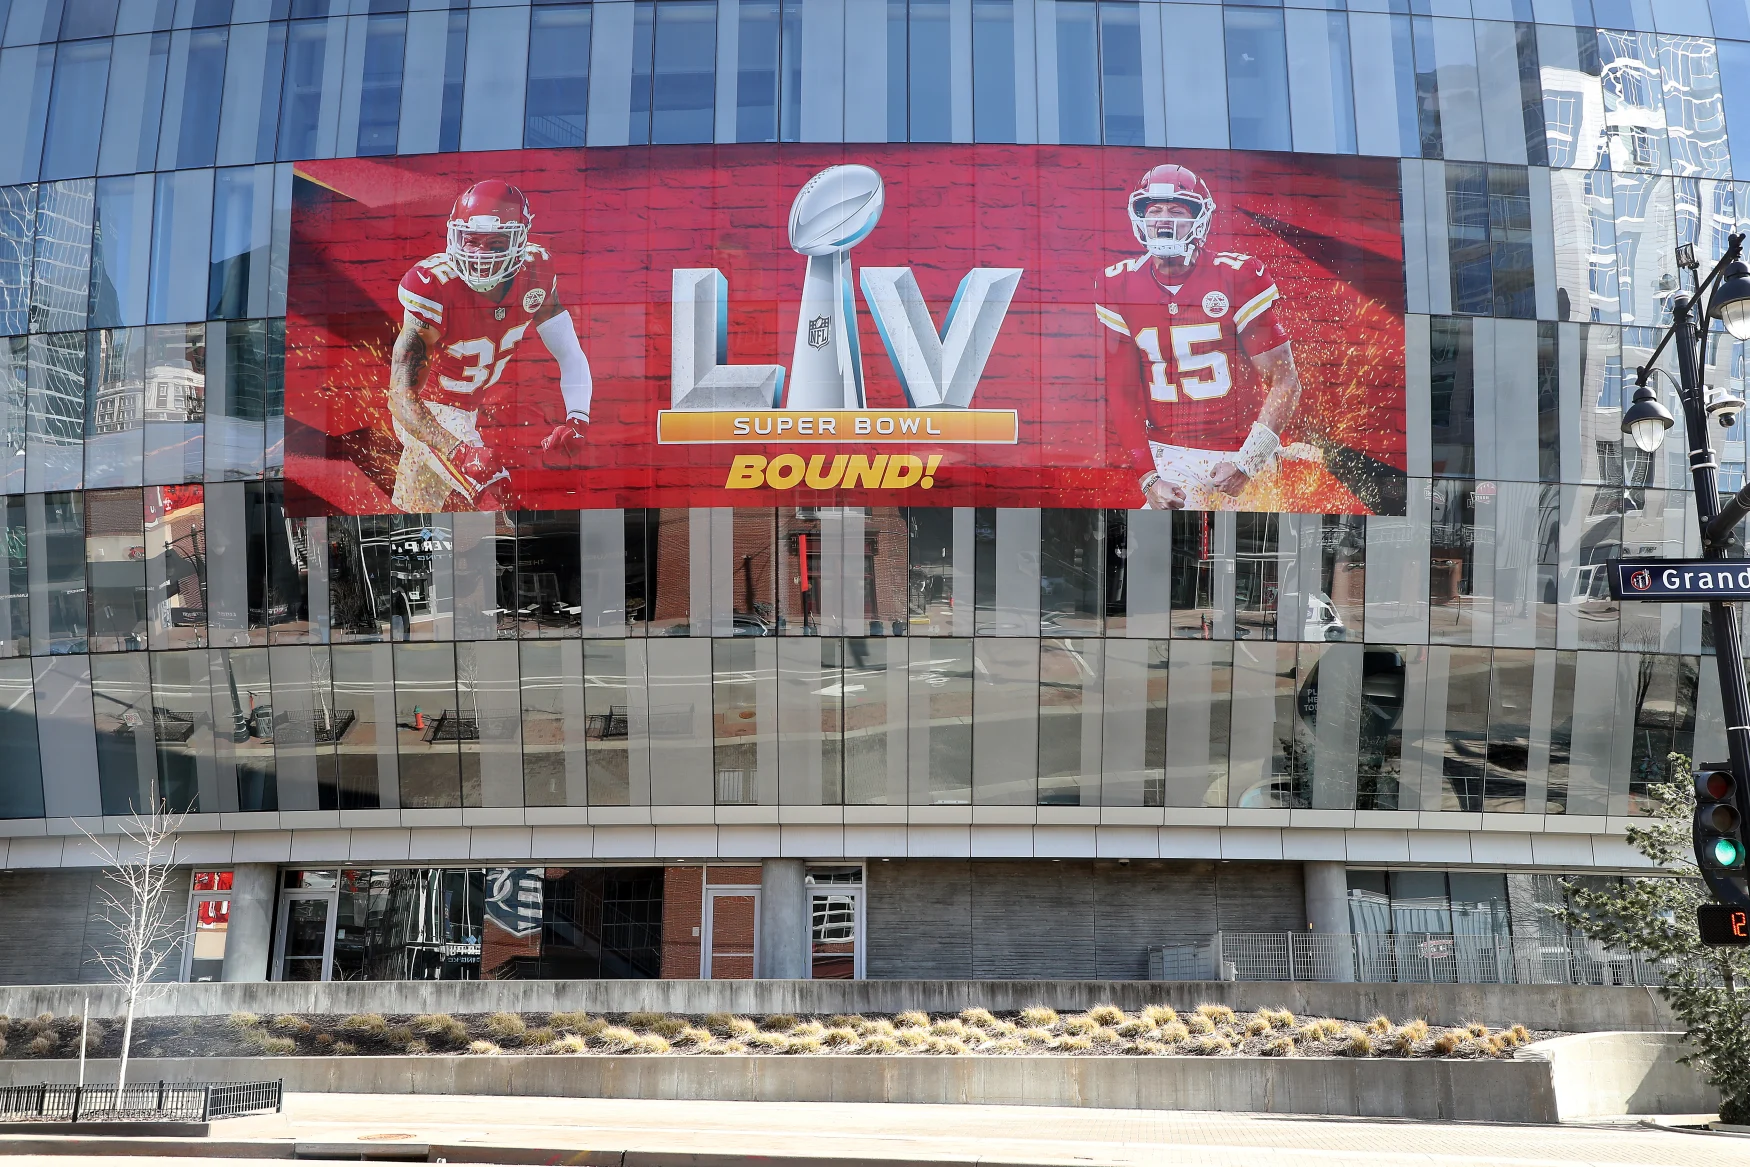 KANSAS CITY, MISSOURI - FEBRUARY 03:  The T-Mobile Center is decorated with a banner in support of the Kansas City Chiefs ahead of Super Bowl LV on February 03, 2021 in Kansas City, Missouri. (Photo by Jamie Squire/Getty Images)